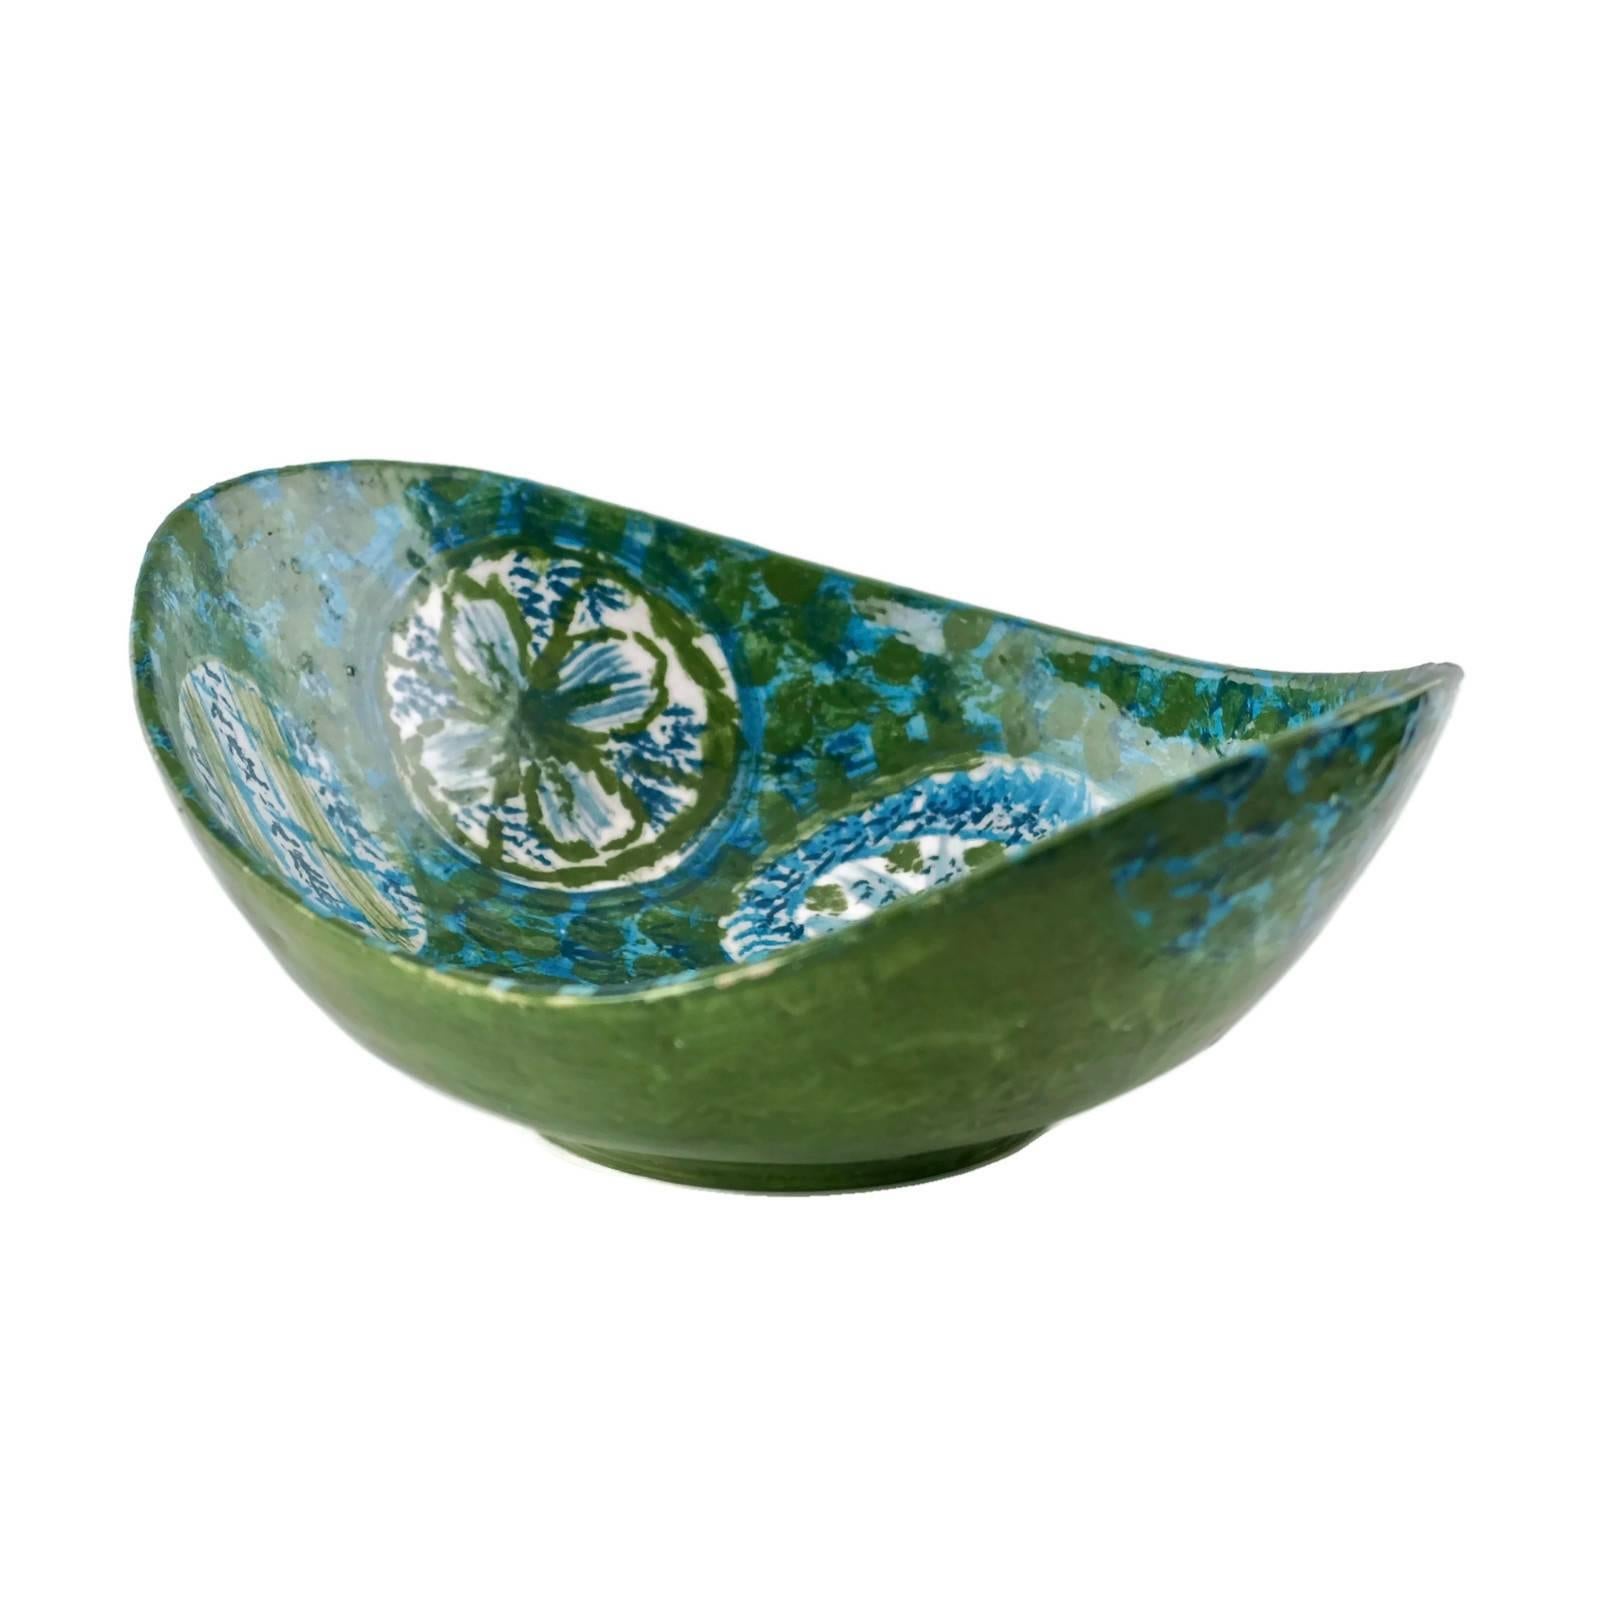 This unusual ceramic centerpiece bowl was made in Italy for American importer Raymor. The piece has an elongated scoop form and has been hand-painted in shades of blue and green. The sponged interior features six ovoid shapes decorated with abstract